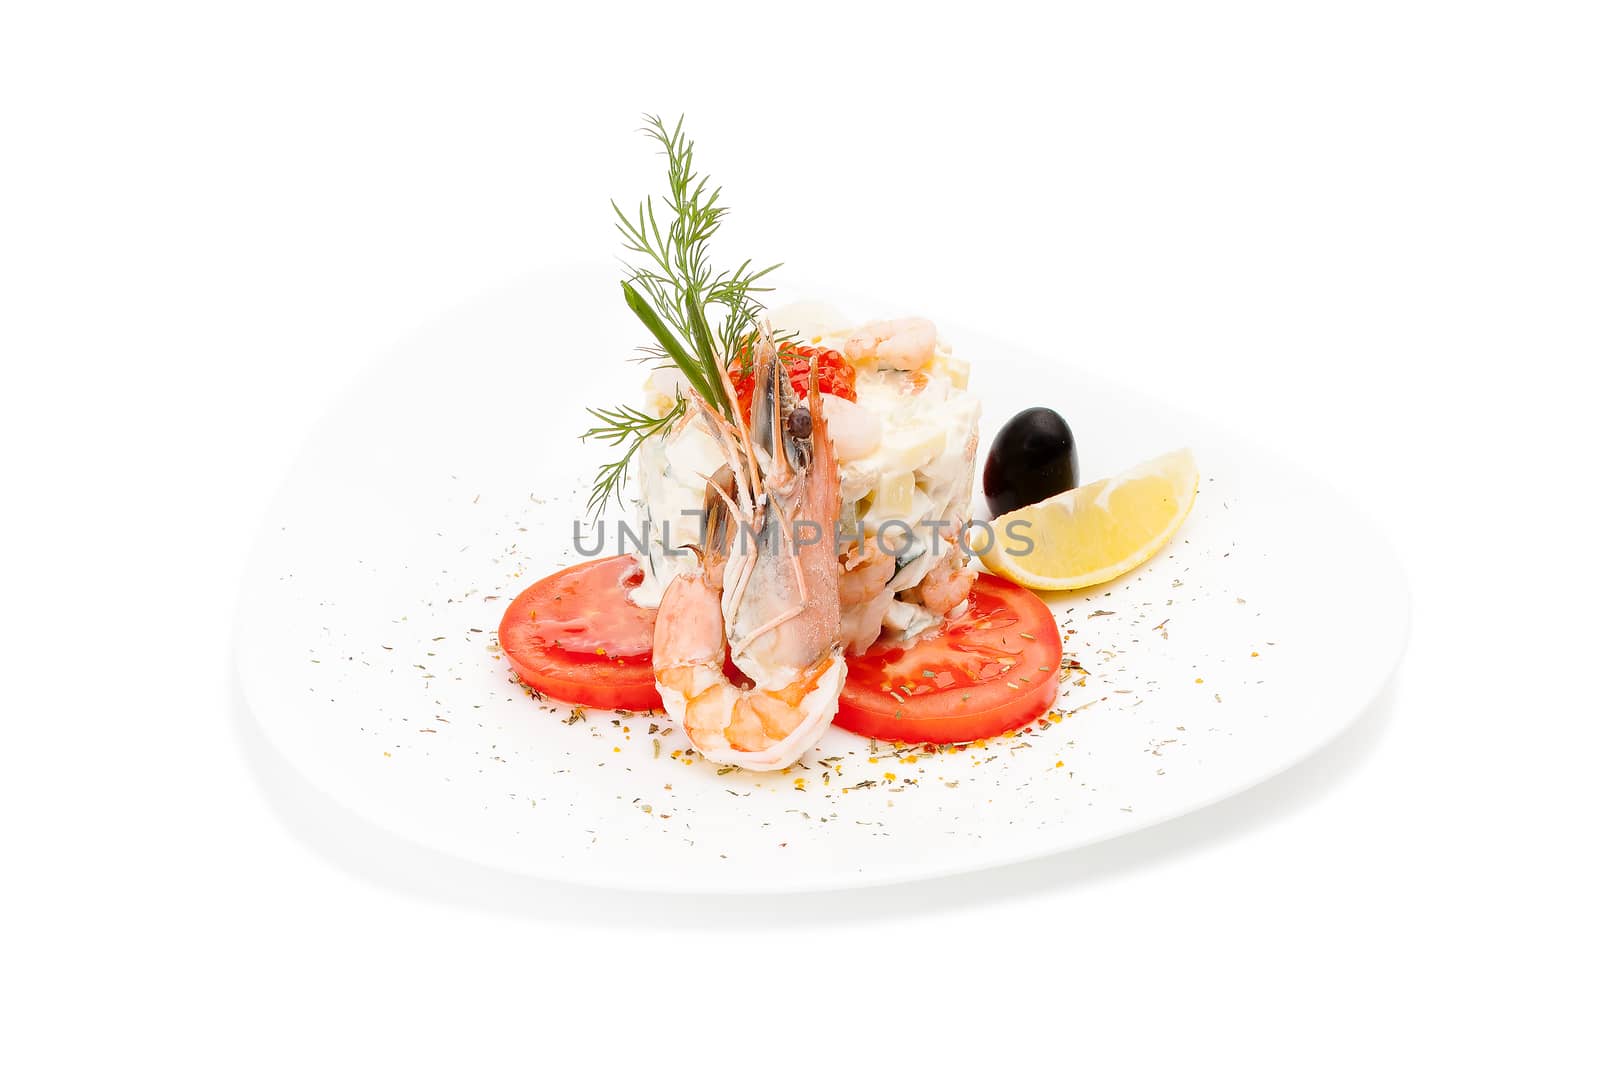 Seafood dish with shrimps. Isolated Delicious Salad with shrimps, tomatoes & fennel garnished with a olives & lemon on a white plate.